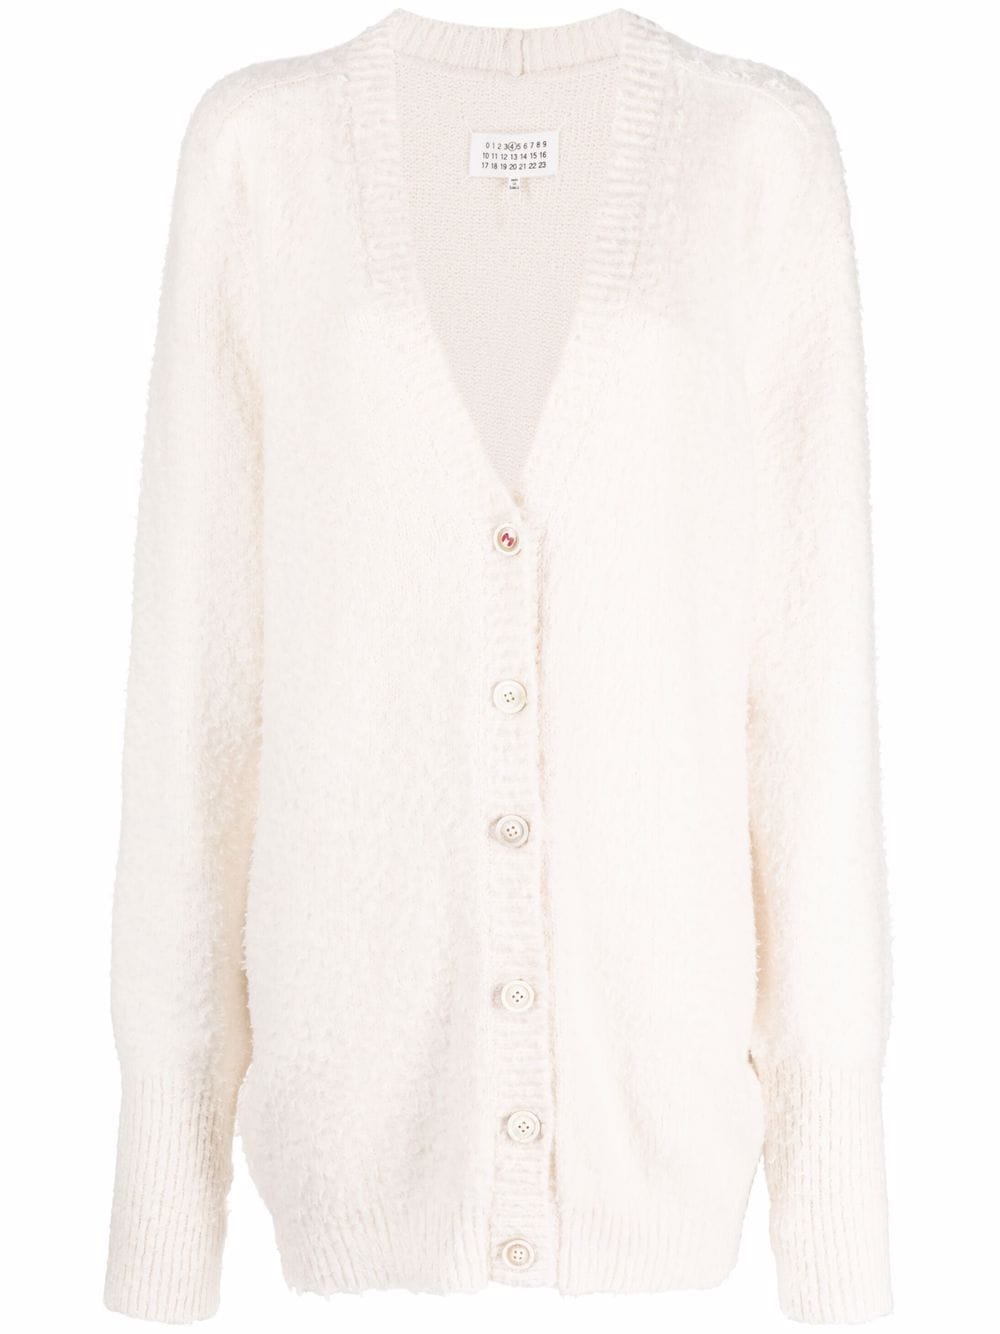 button-up knitted cardigan